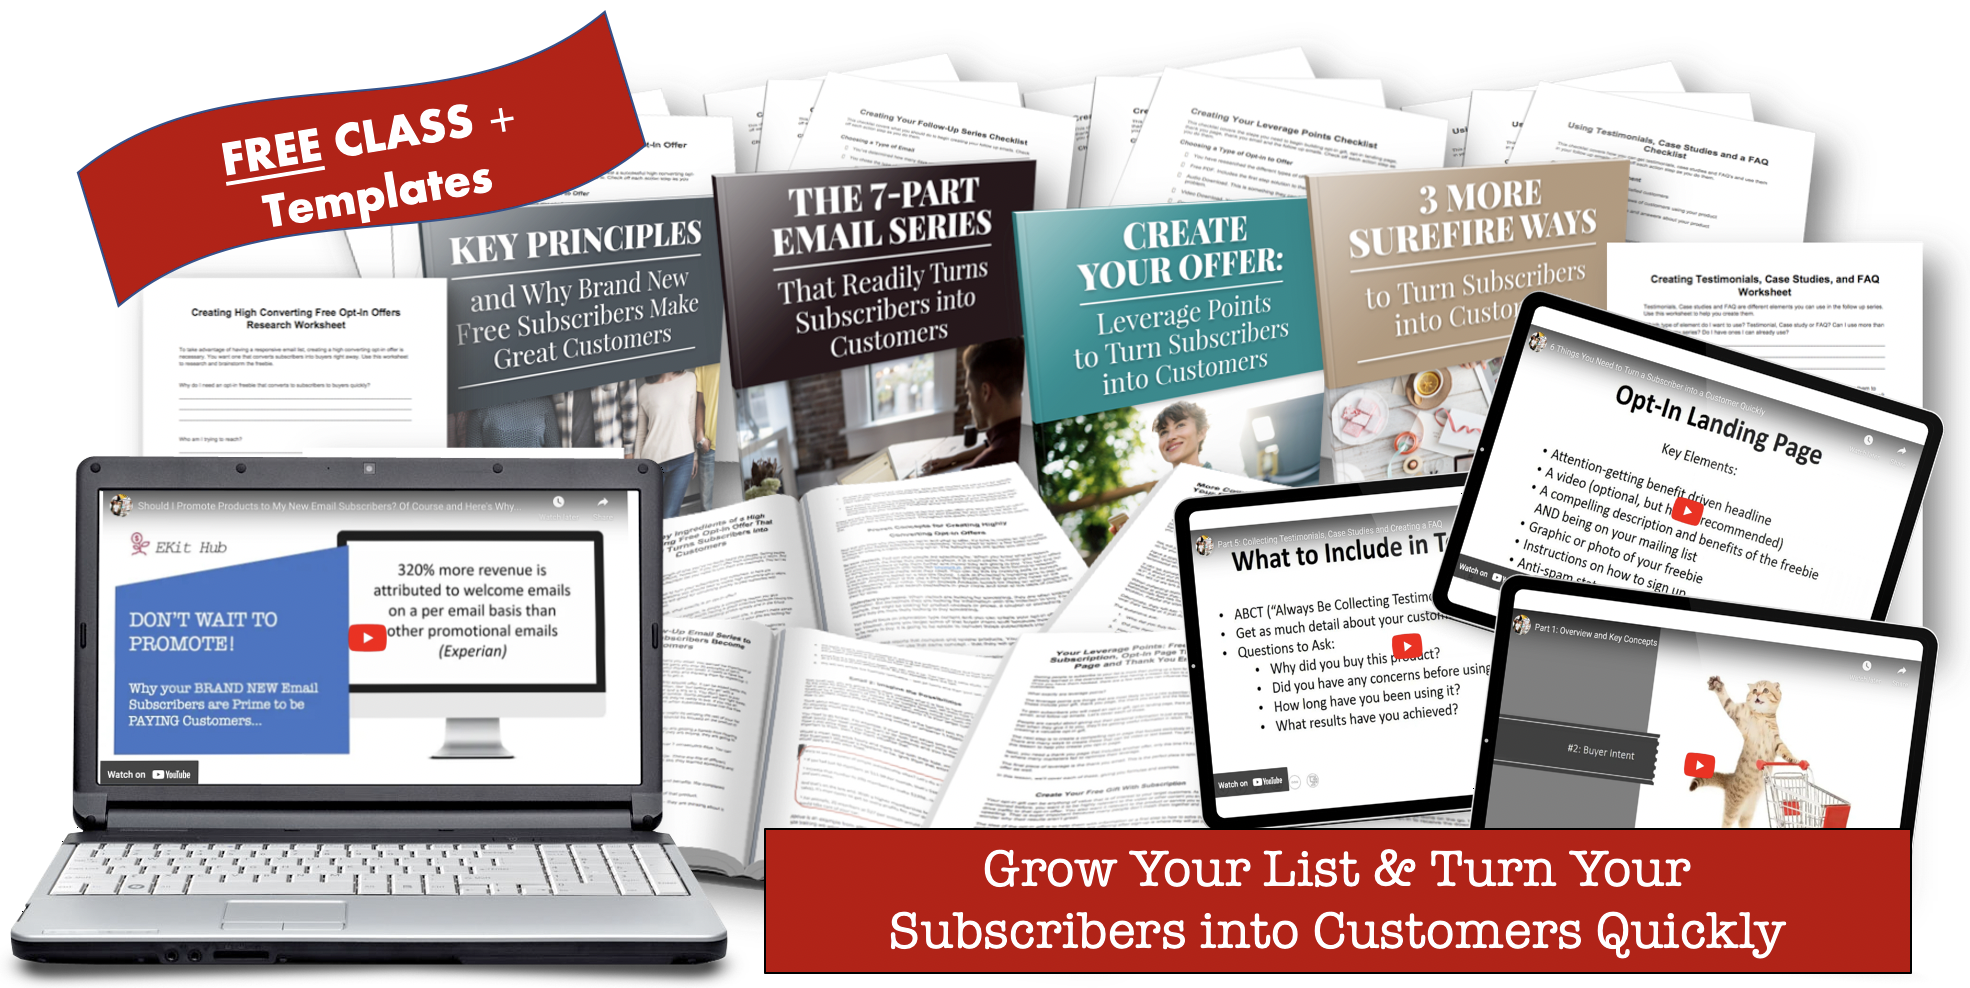 Free Email Marketing Class + Templates